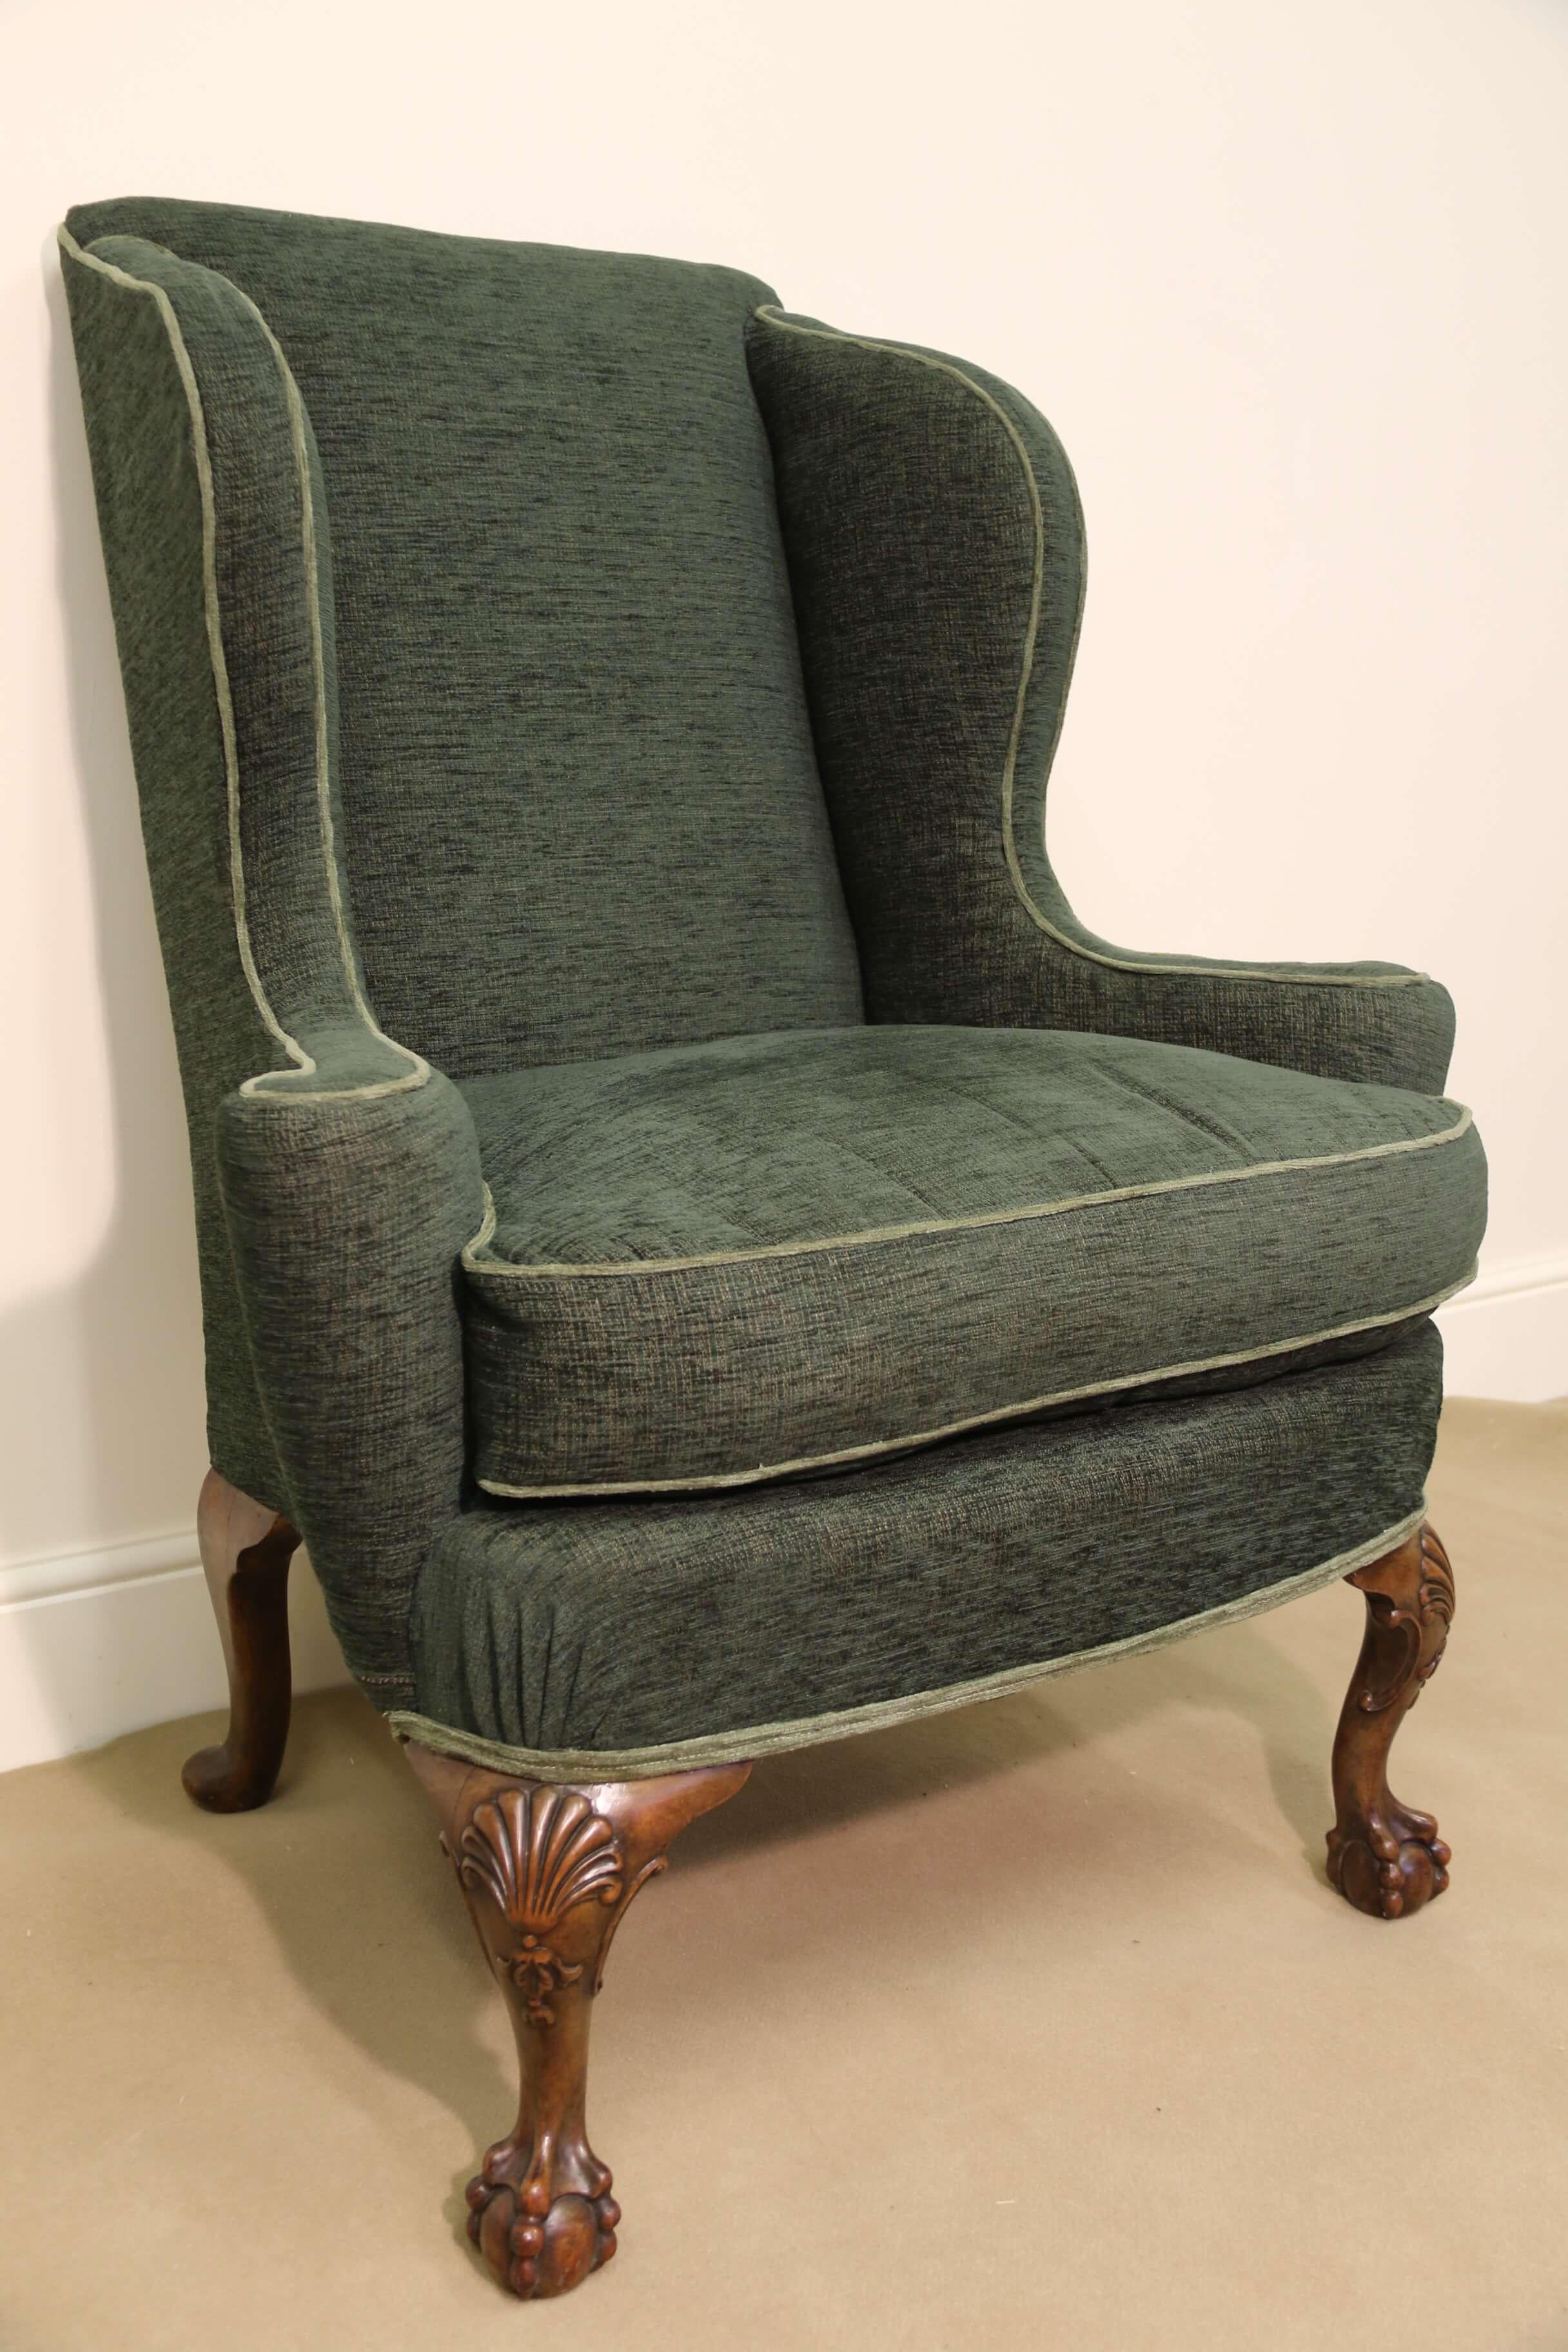 This stunning large scale late 19th century copy of a very fine George I winged armchair is correct in scale, timber and detail. The broad sweeping wing arms flow perfectly with good proportions giving the chair the perfect period look.
This chair